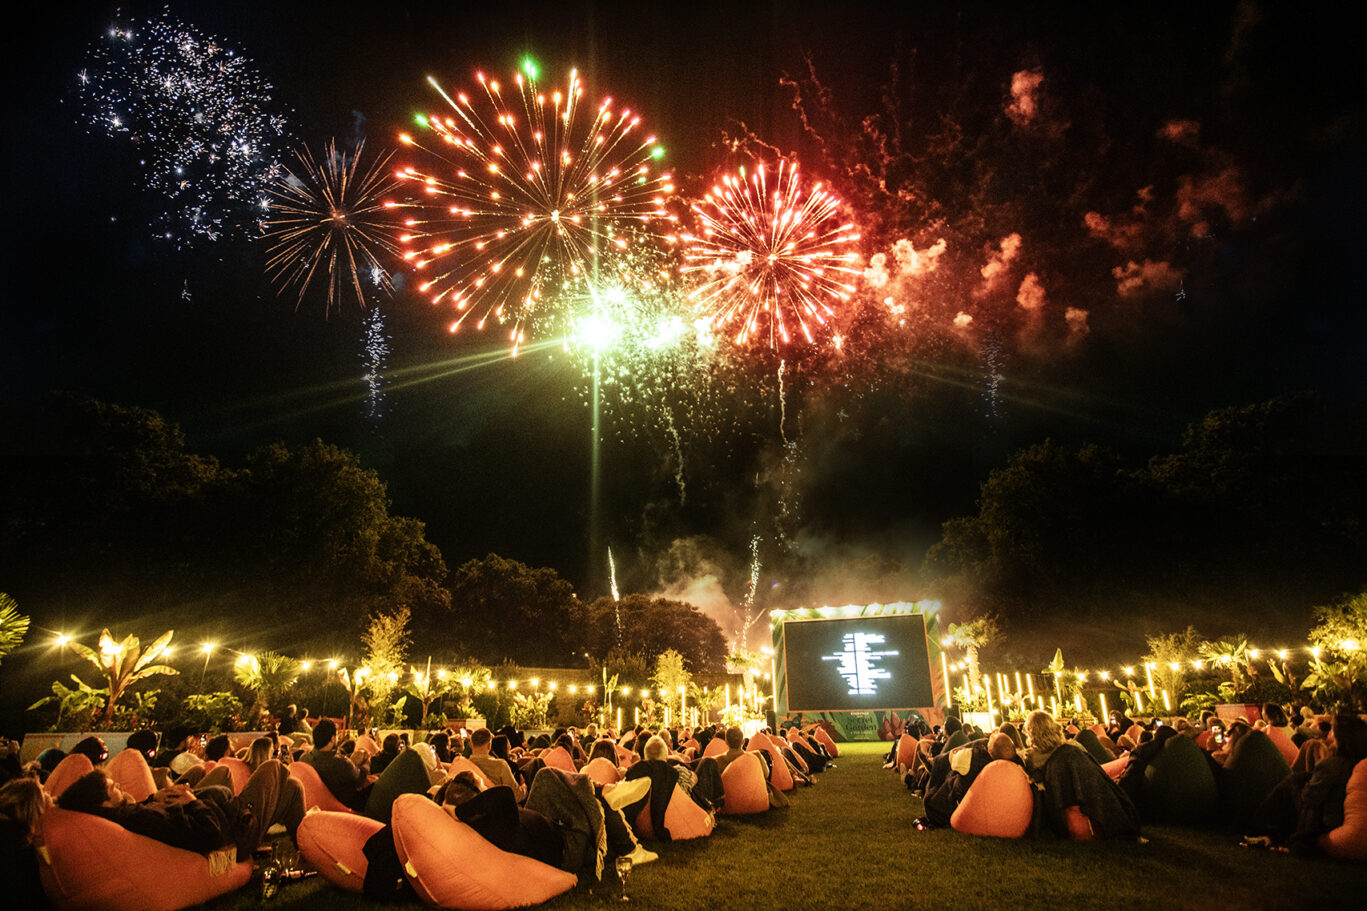 Outdoor cinema with fireworks